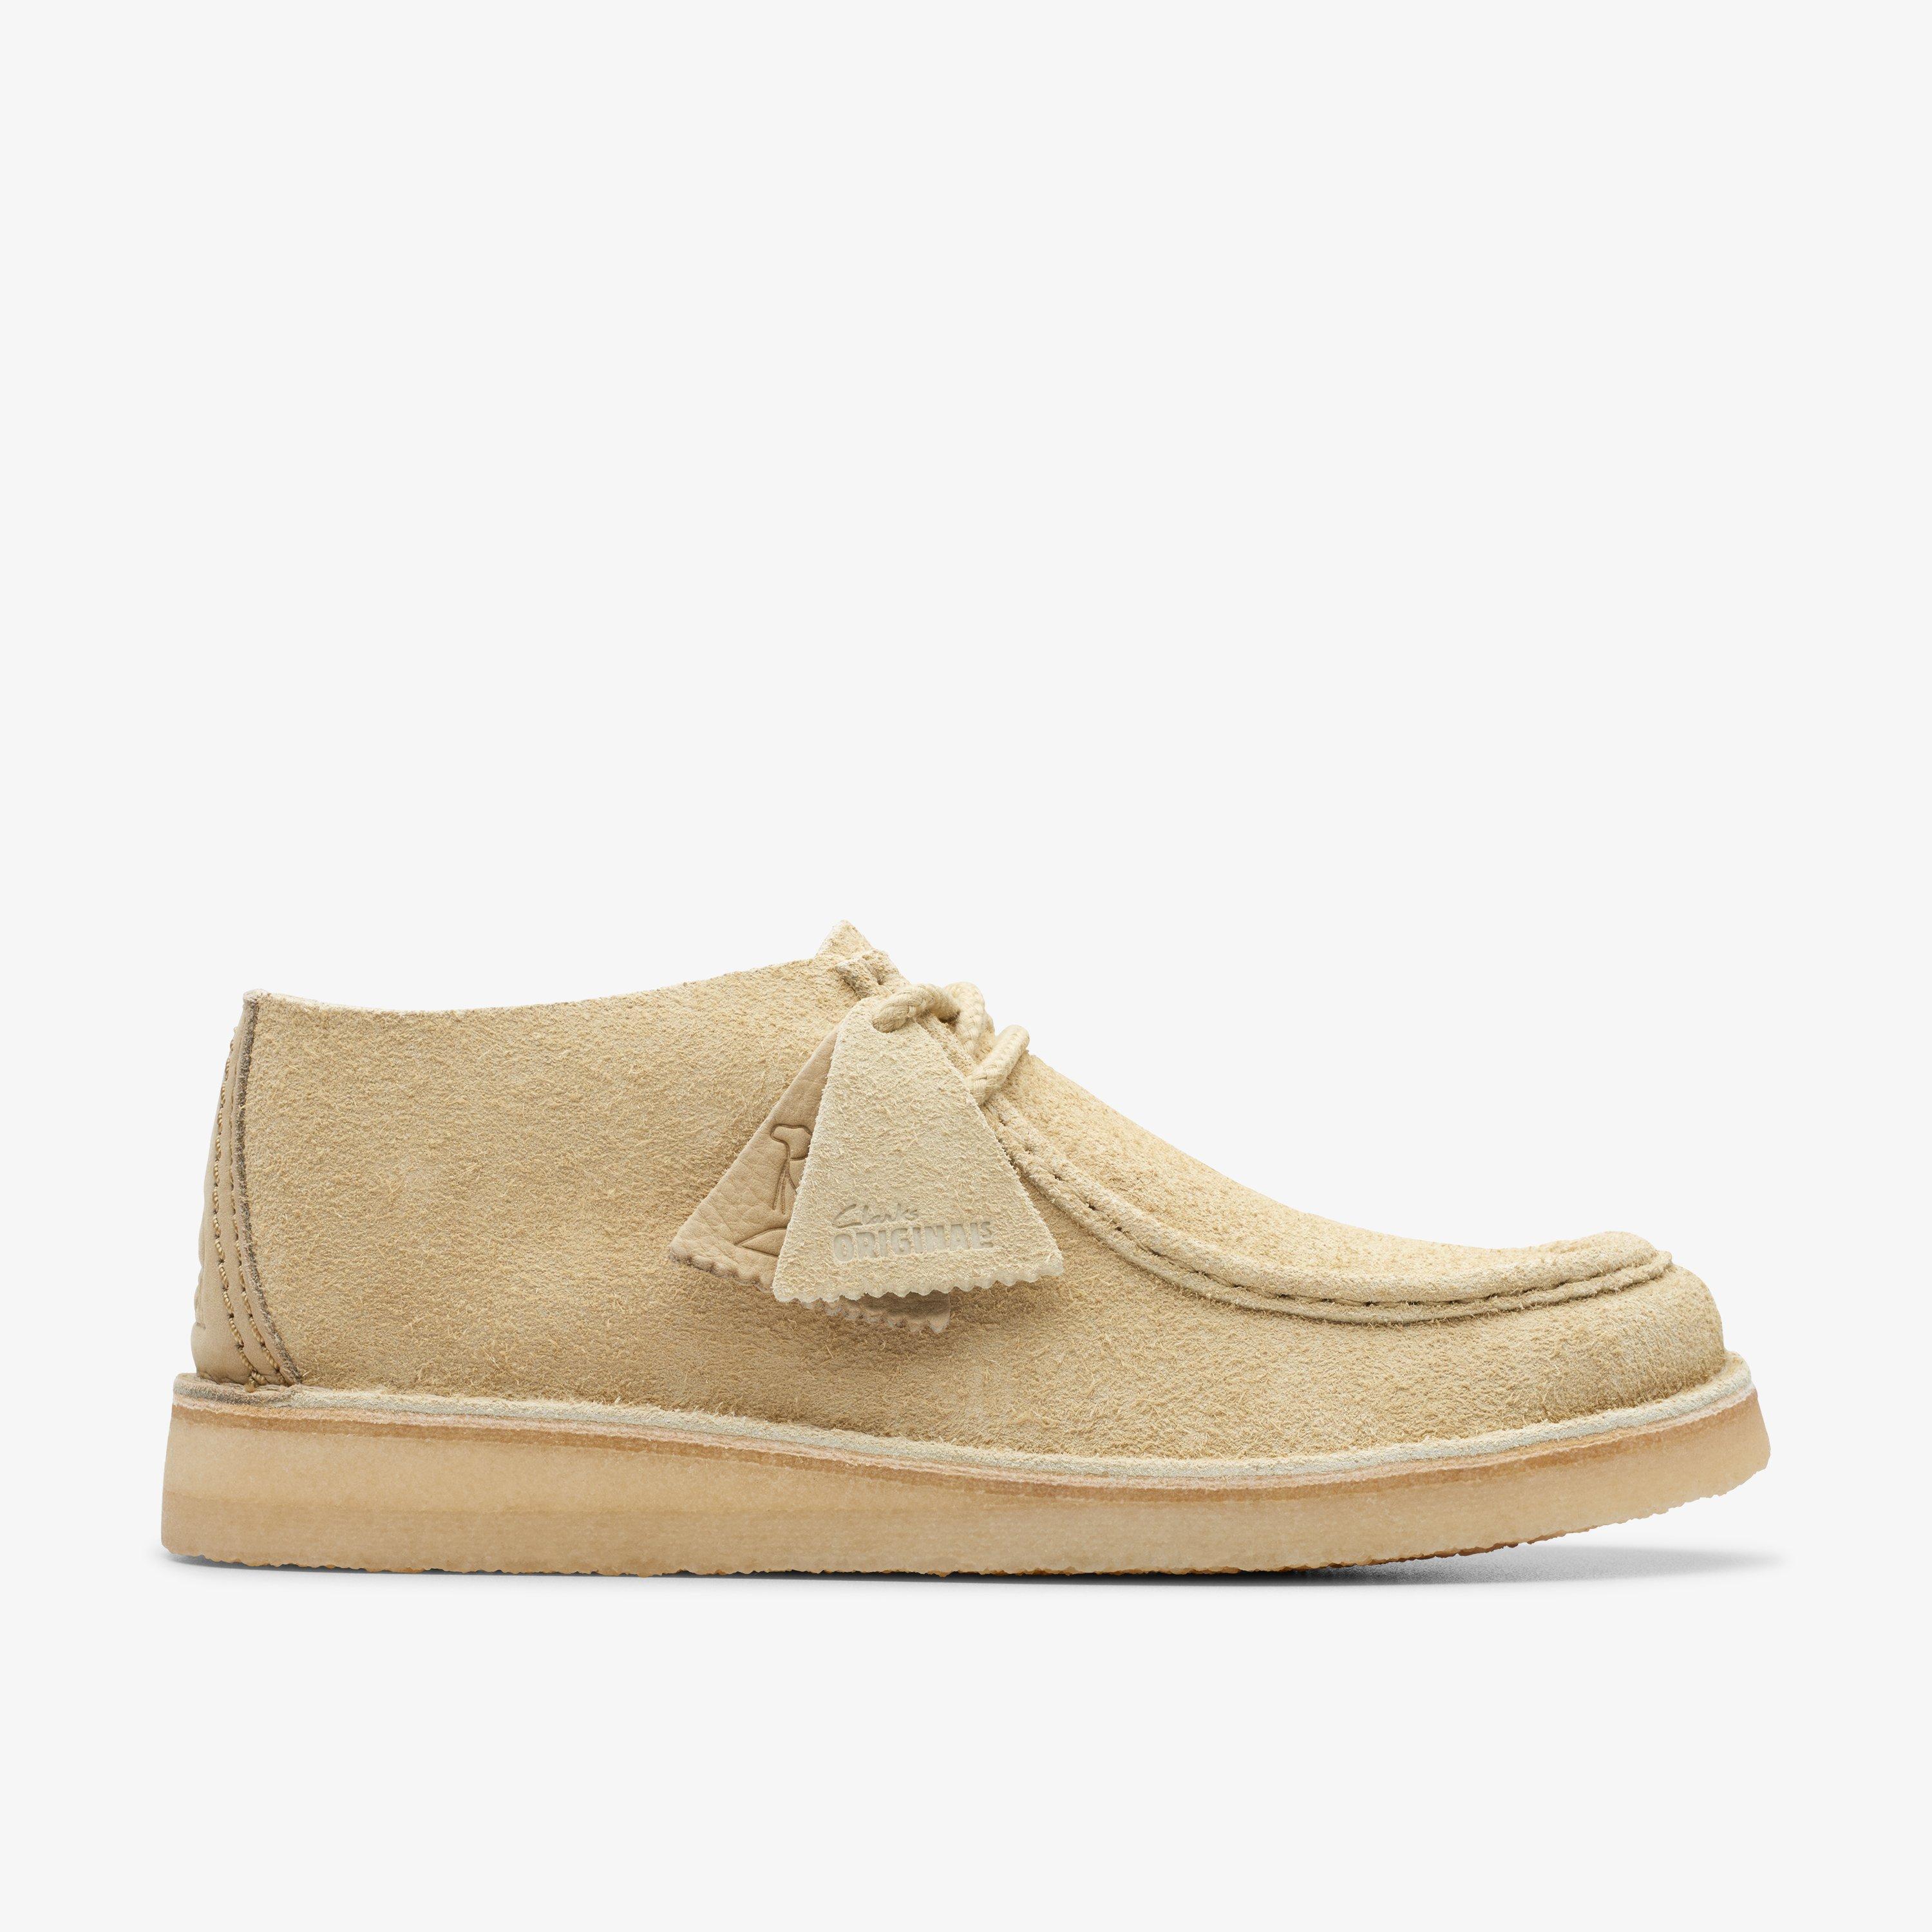 MENS Desert Nomad Maple Hairy Suede Moccasins | Clarks US